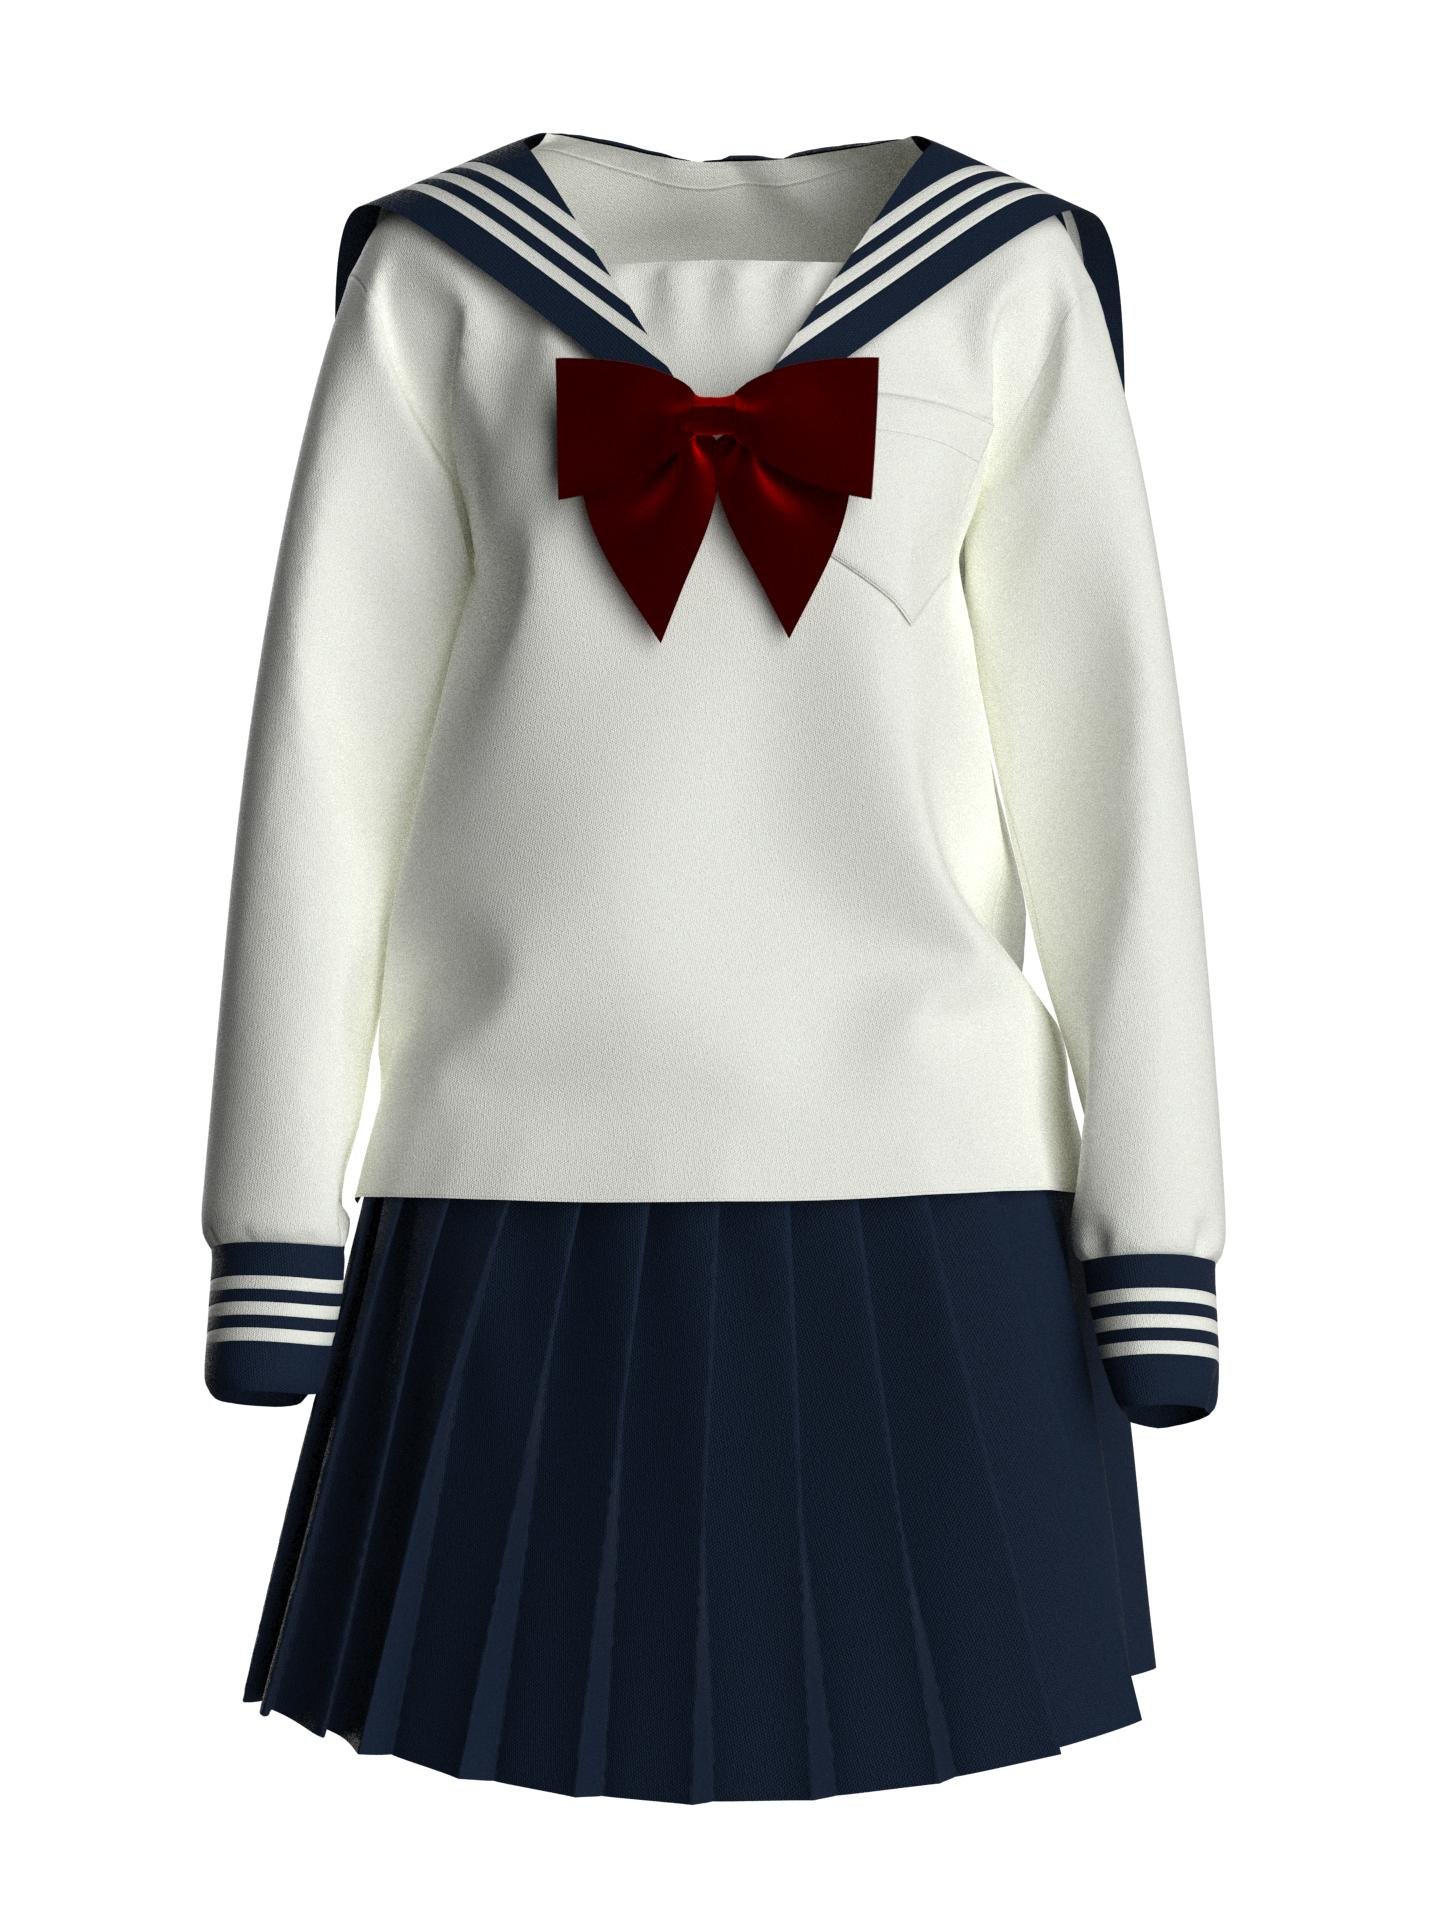 Young Sailor Costume with Skirt by DRESSX